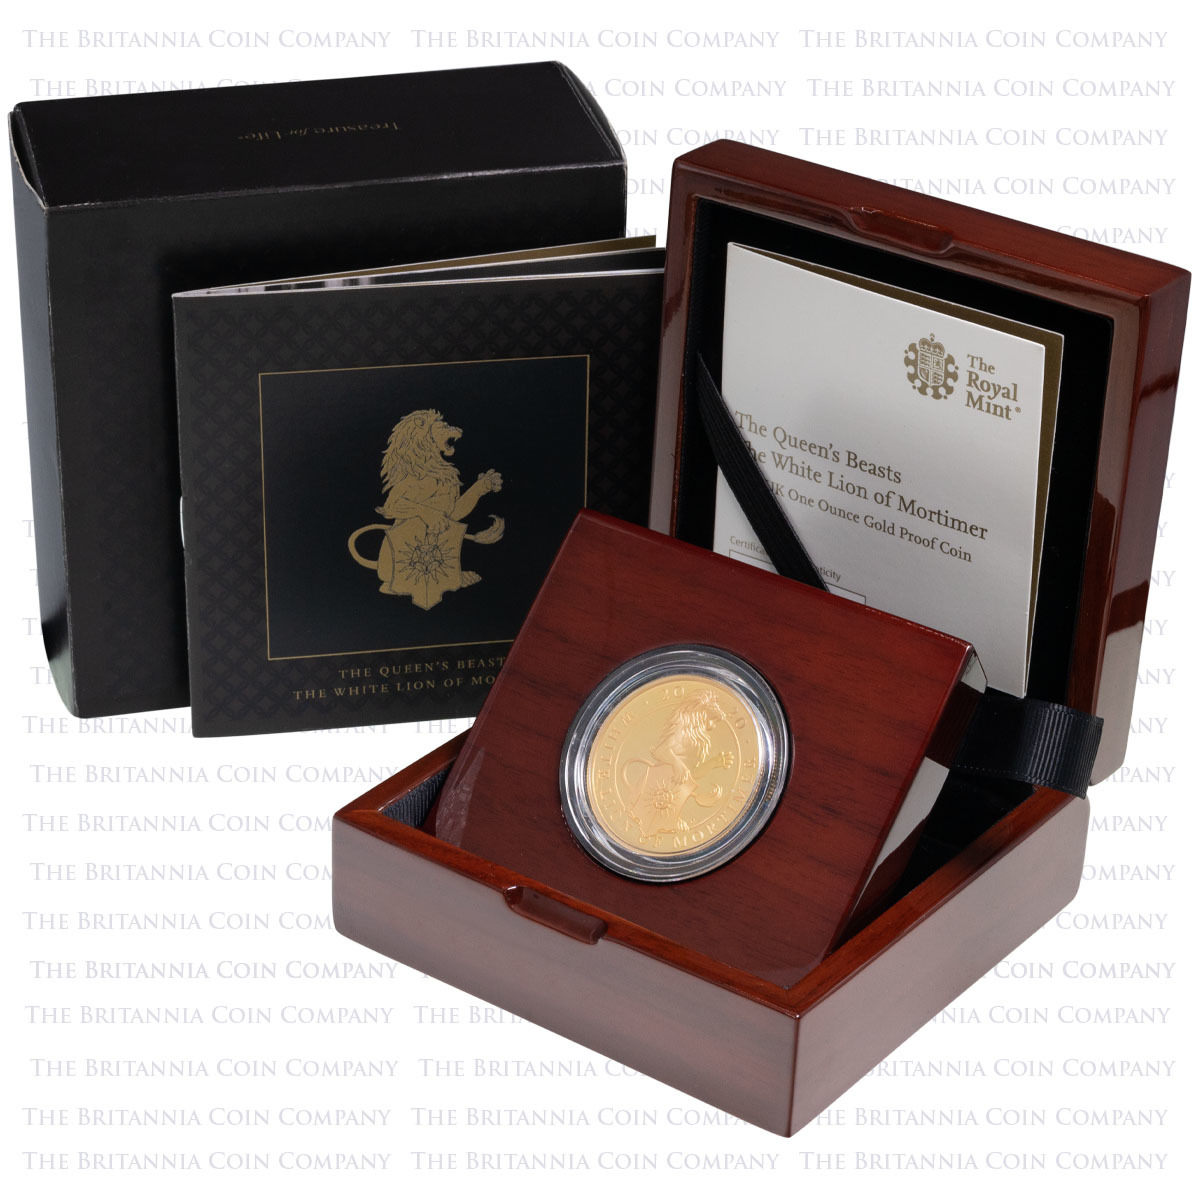 UK20QWGP 2020 Queen's Beasts White Lion Of Mortimer One Ounce Gold Proof Coin Boxed